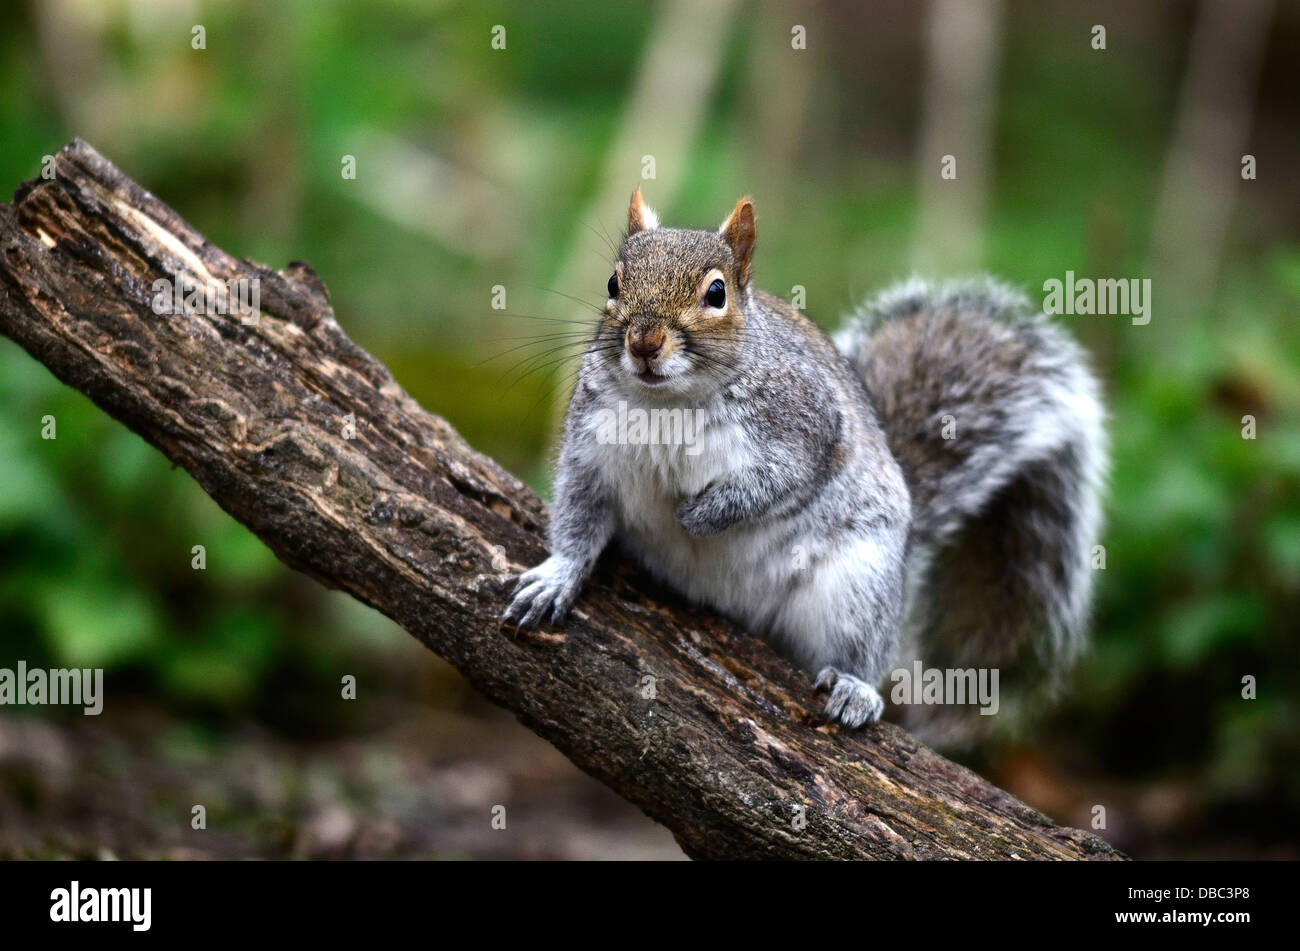 A grey squirrel in a tree UK Stock Photo